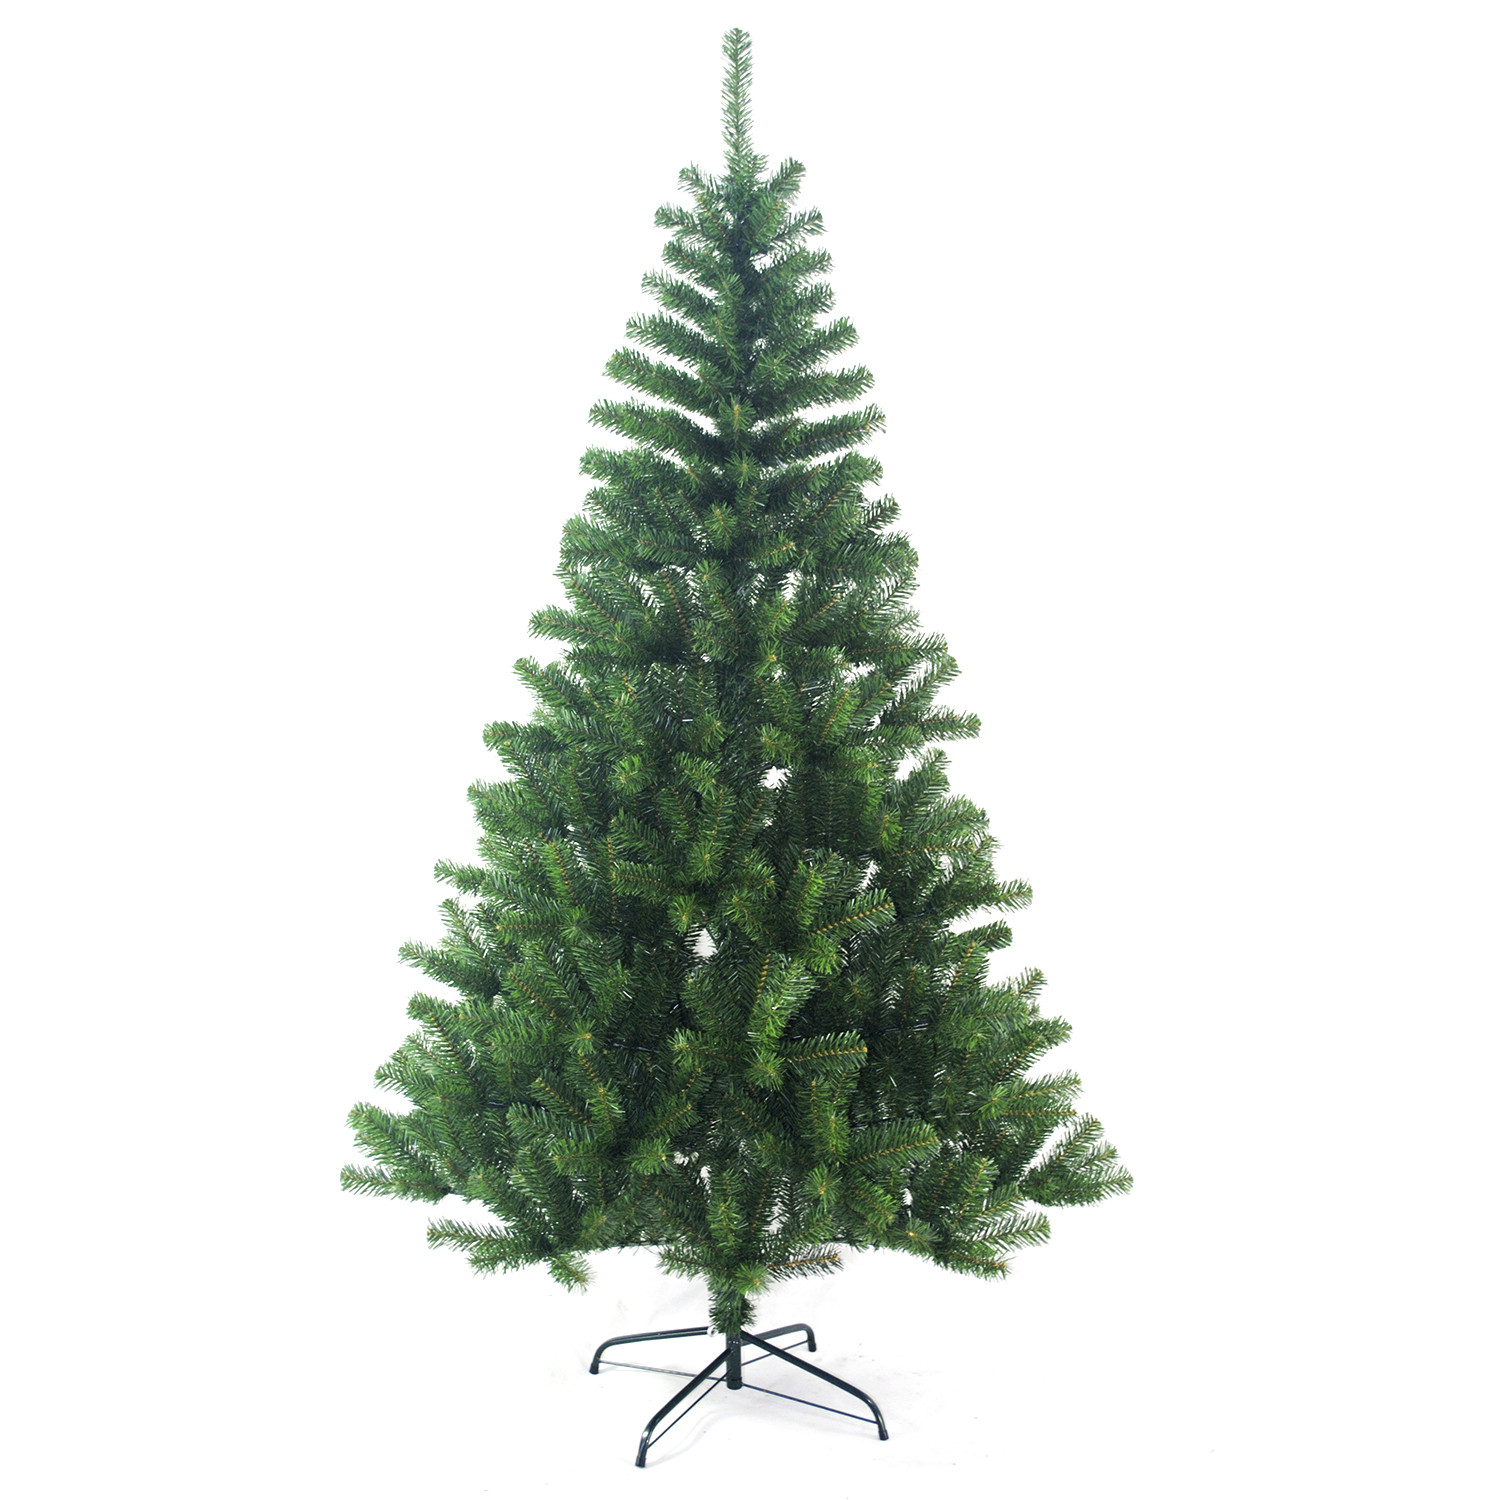 Norway Spruce Artifical Christmas Tree 7ft Image 1